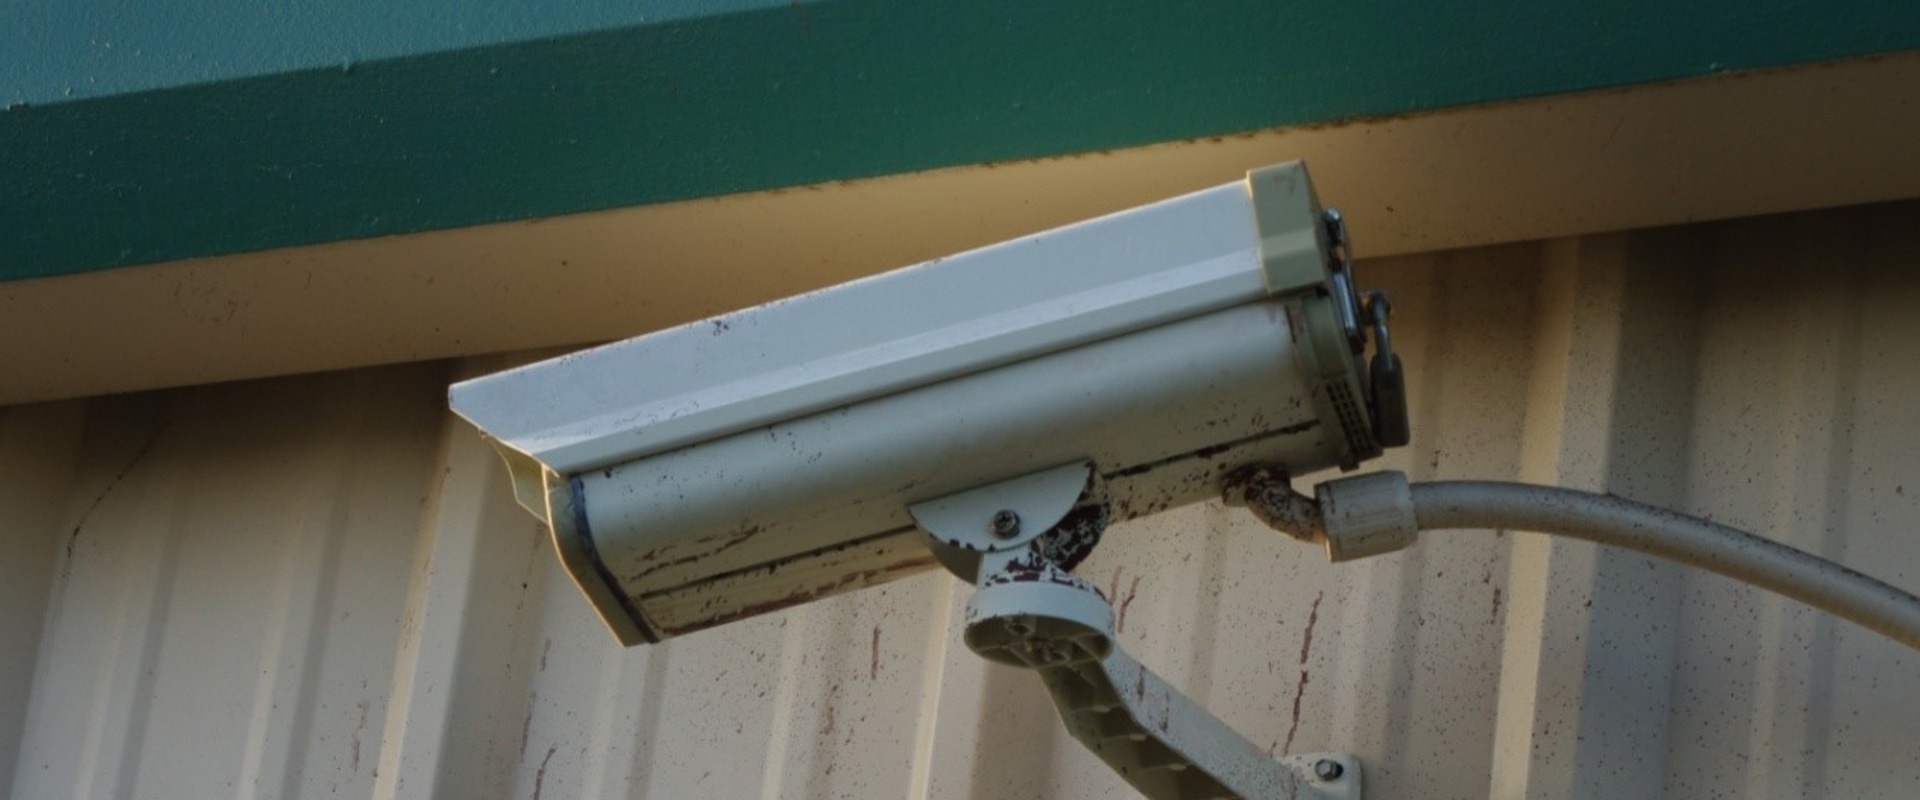 Installation Considerations for Outdoor Webcams